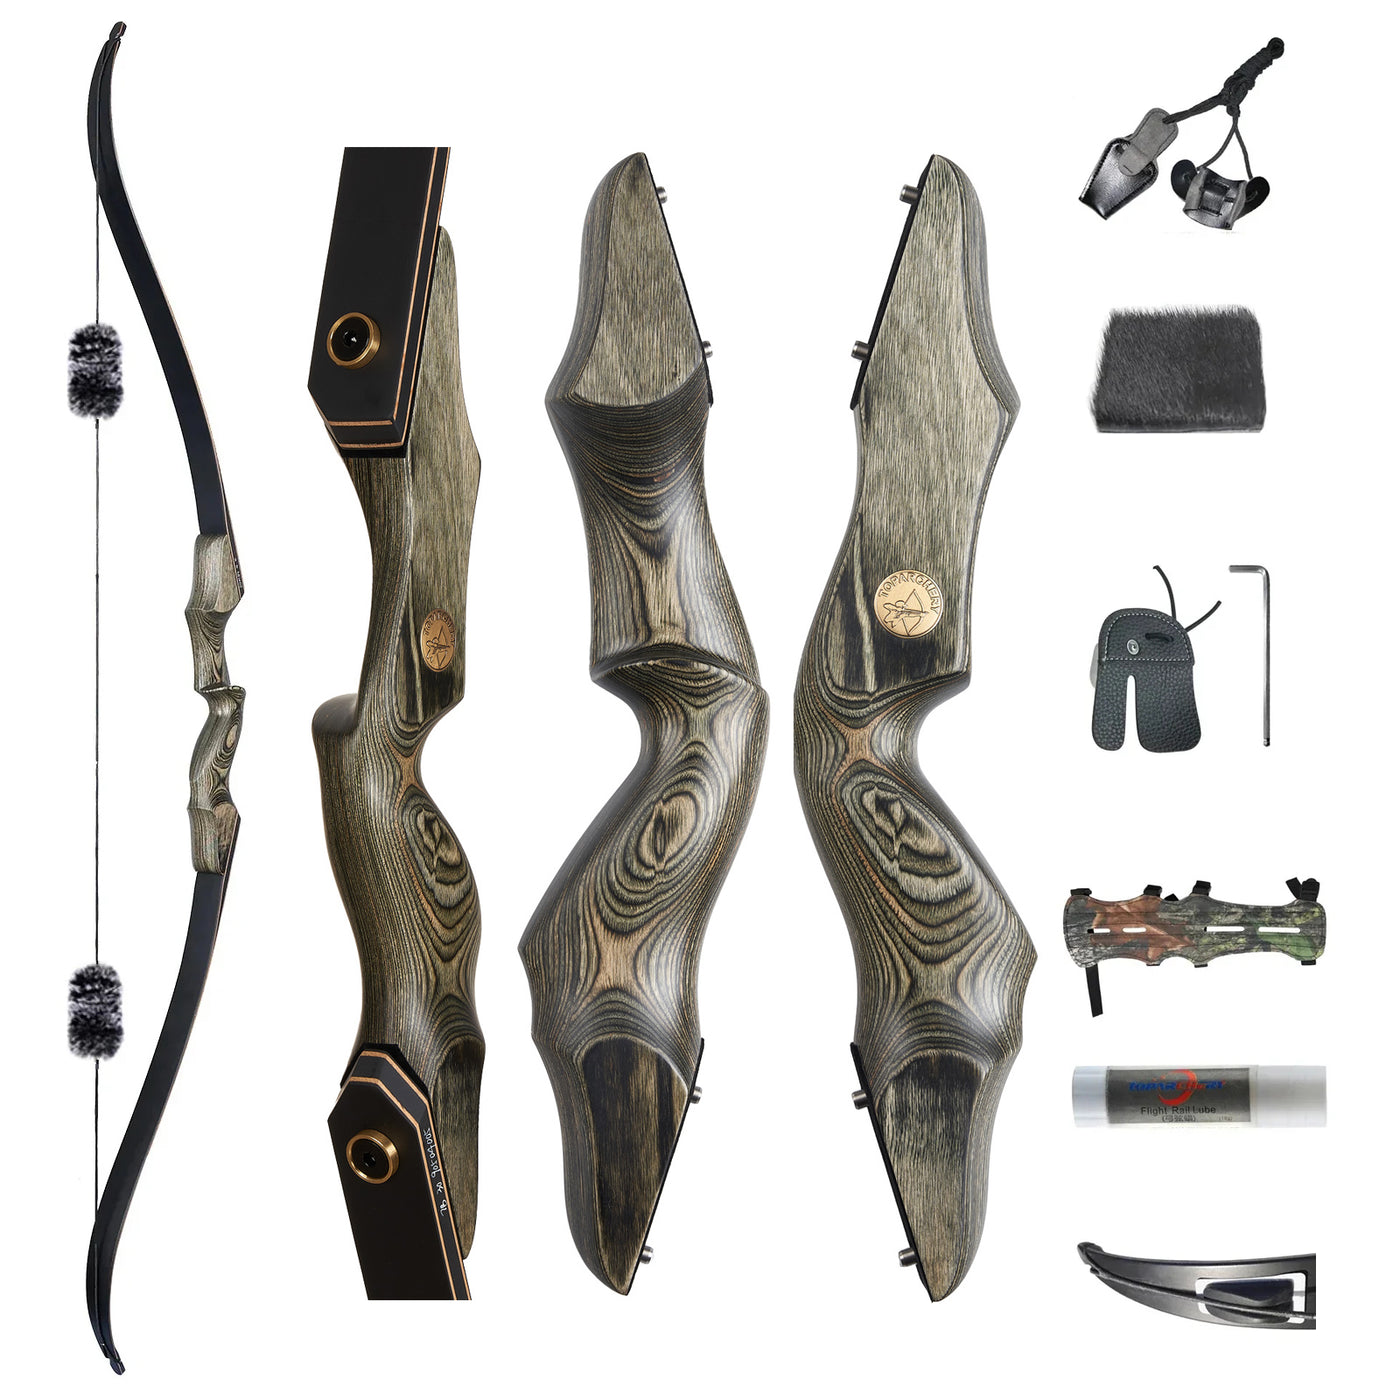 60 Wood Laminated Takedown Recurve Archery Bow Left Right Hand Huntin –